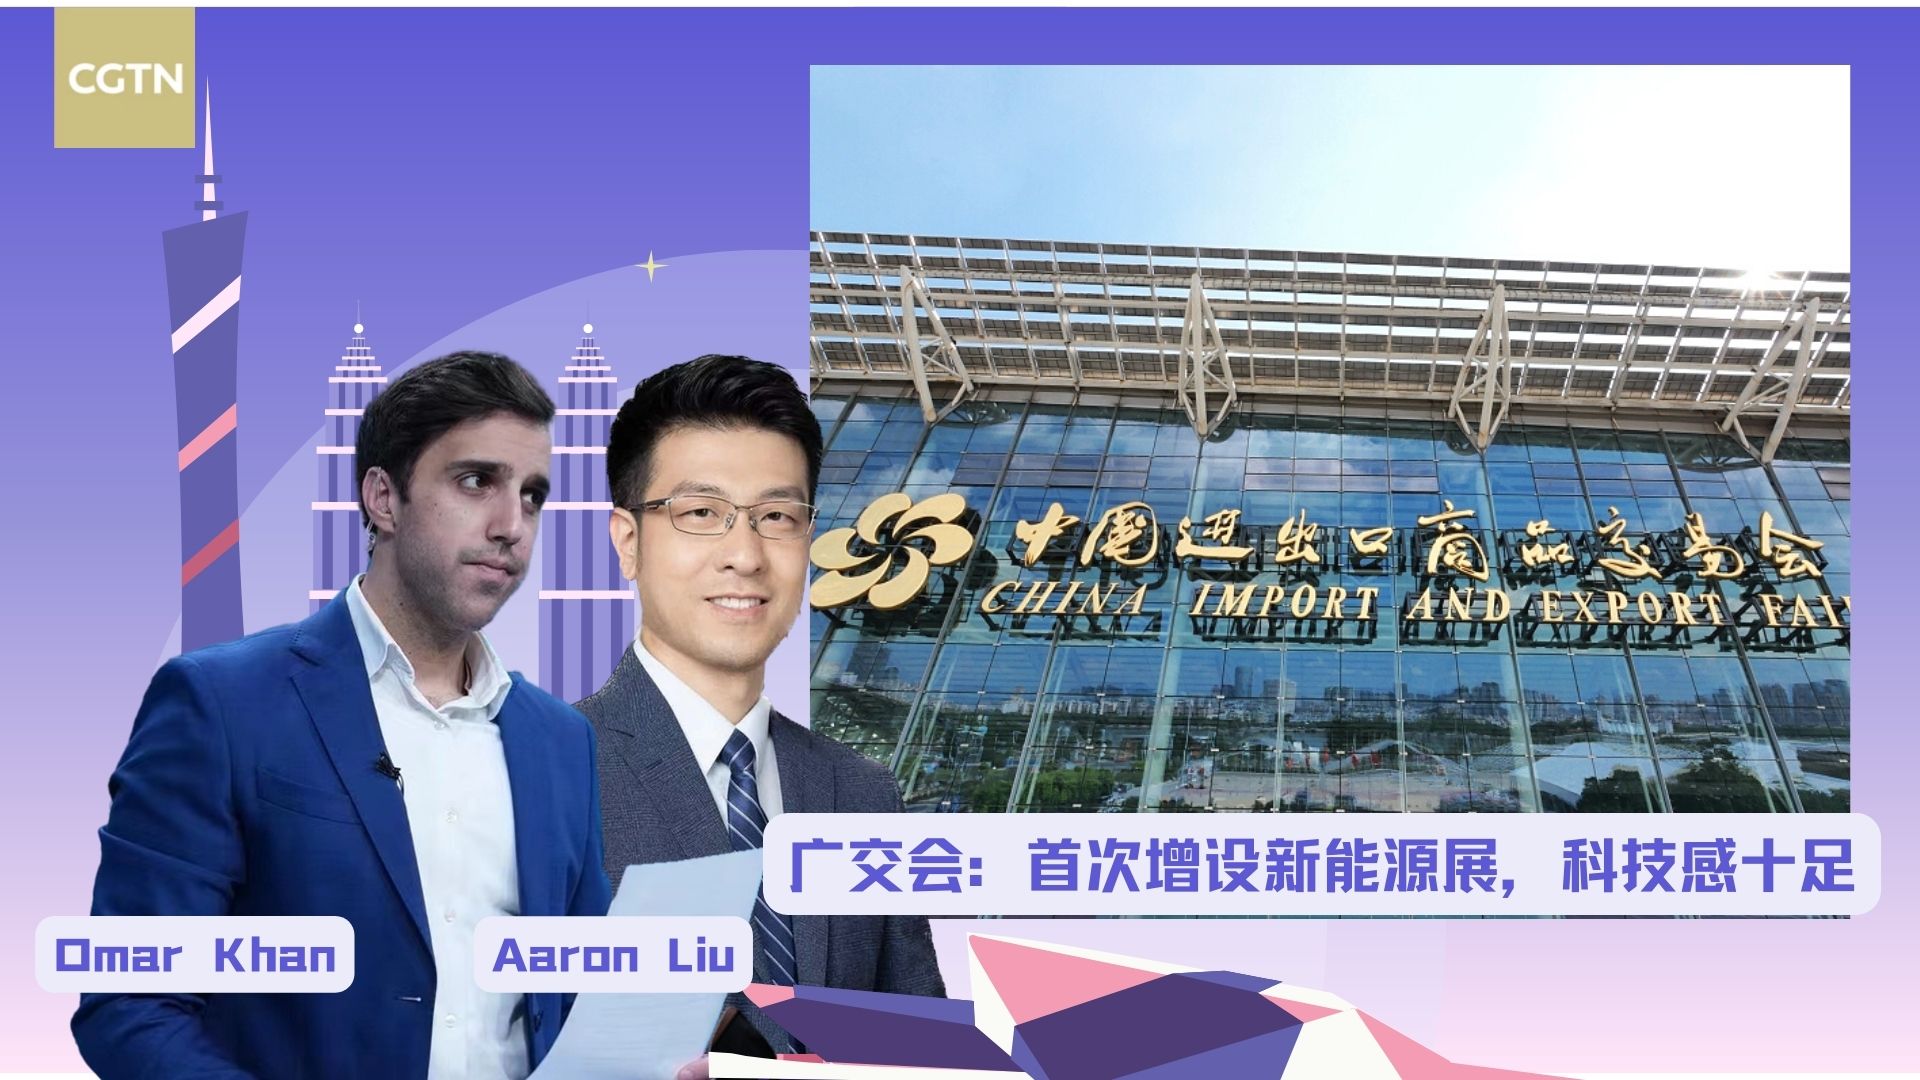 Live: New zones highlighting automation, intelligent manufacturing at the Canton Fair